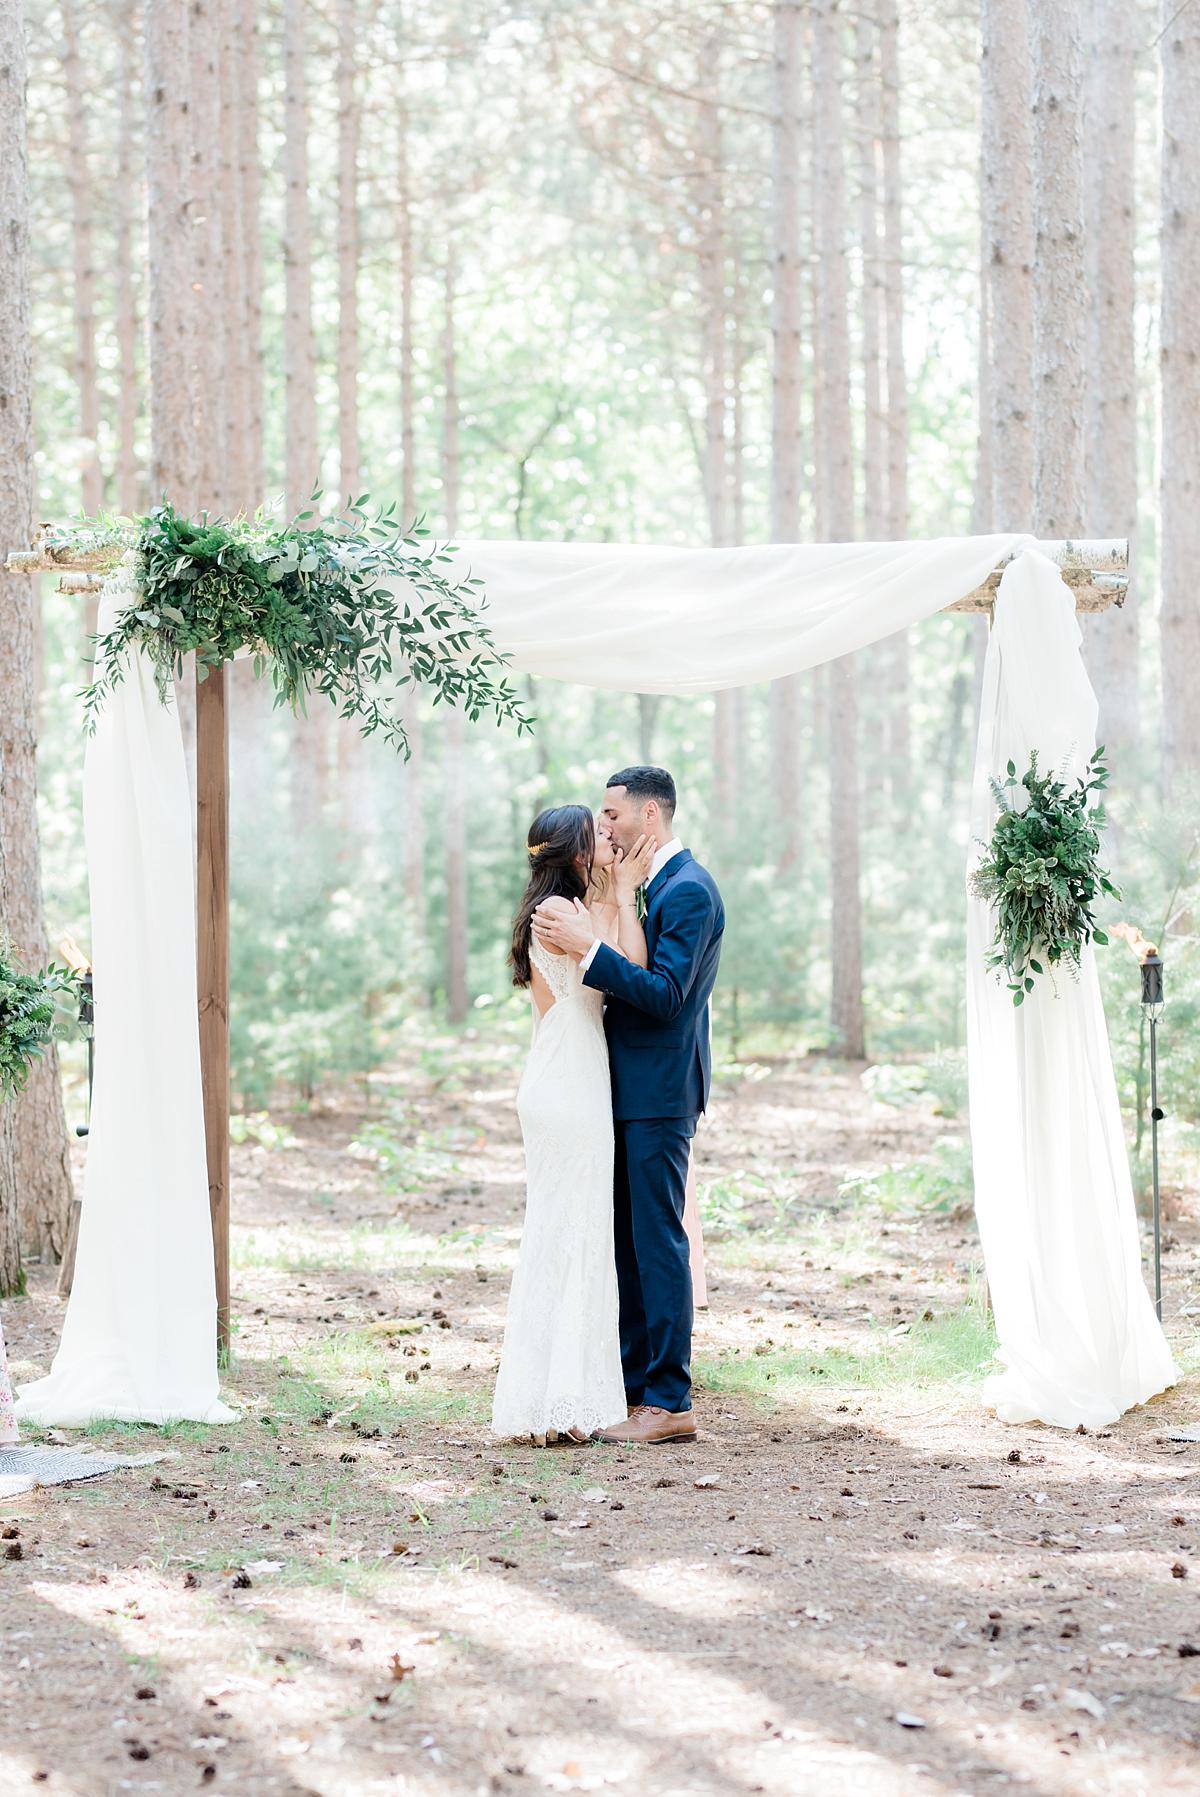 Courtney Ilan Forest Wedding at Burlap and Bells in Black River Falls Wisconsin by Meghan Lee Harris Wedding Photography Wisconsin Destination Wedding Photographer